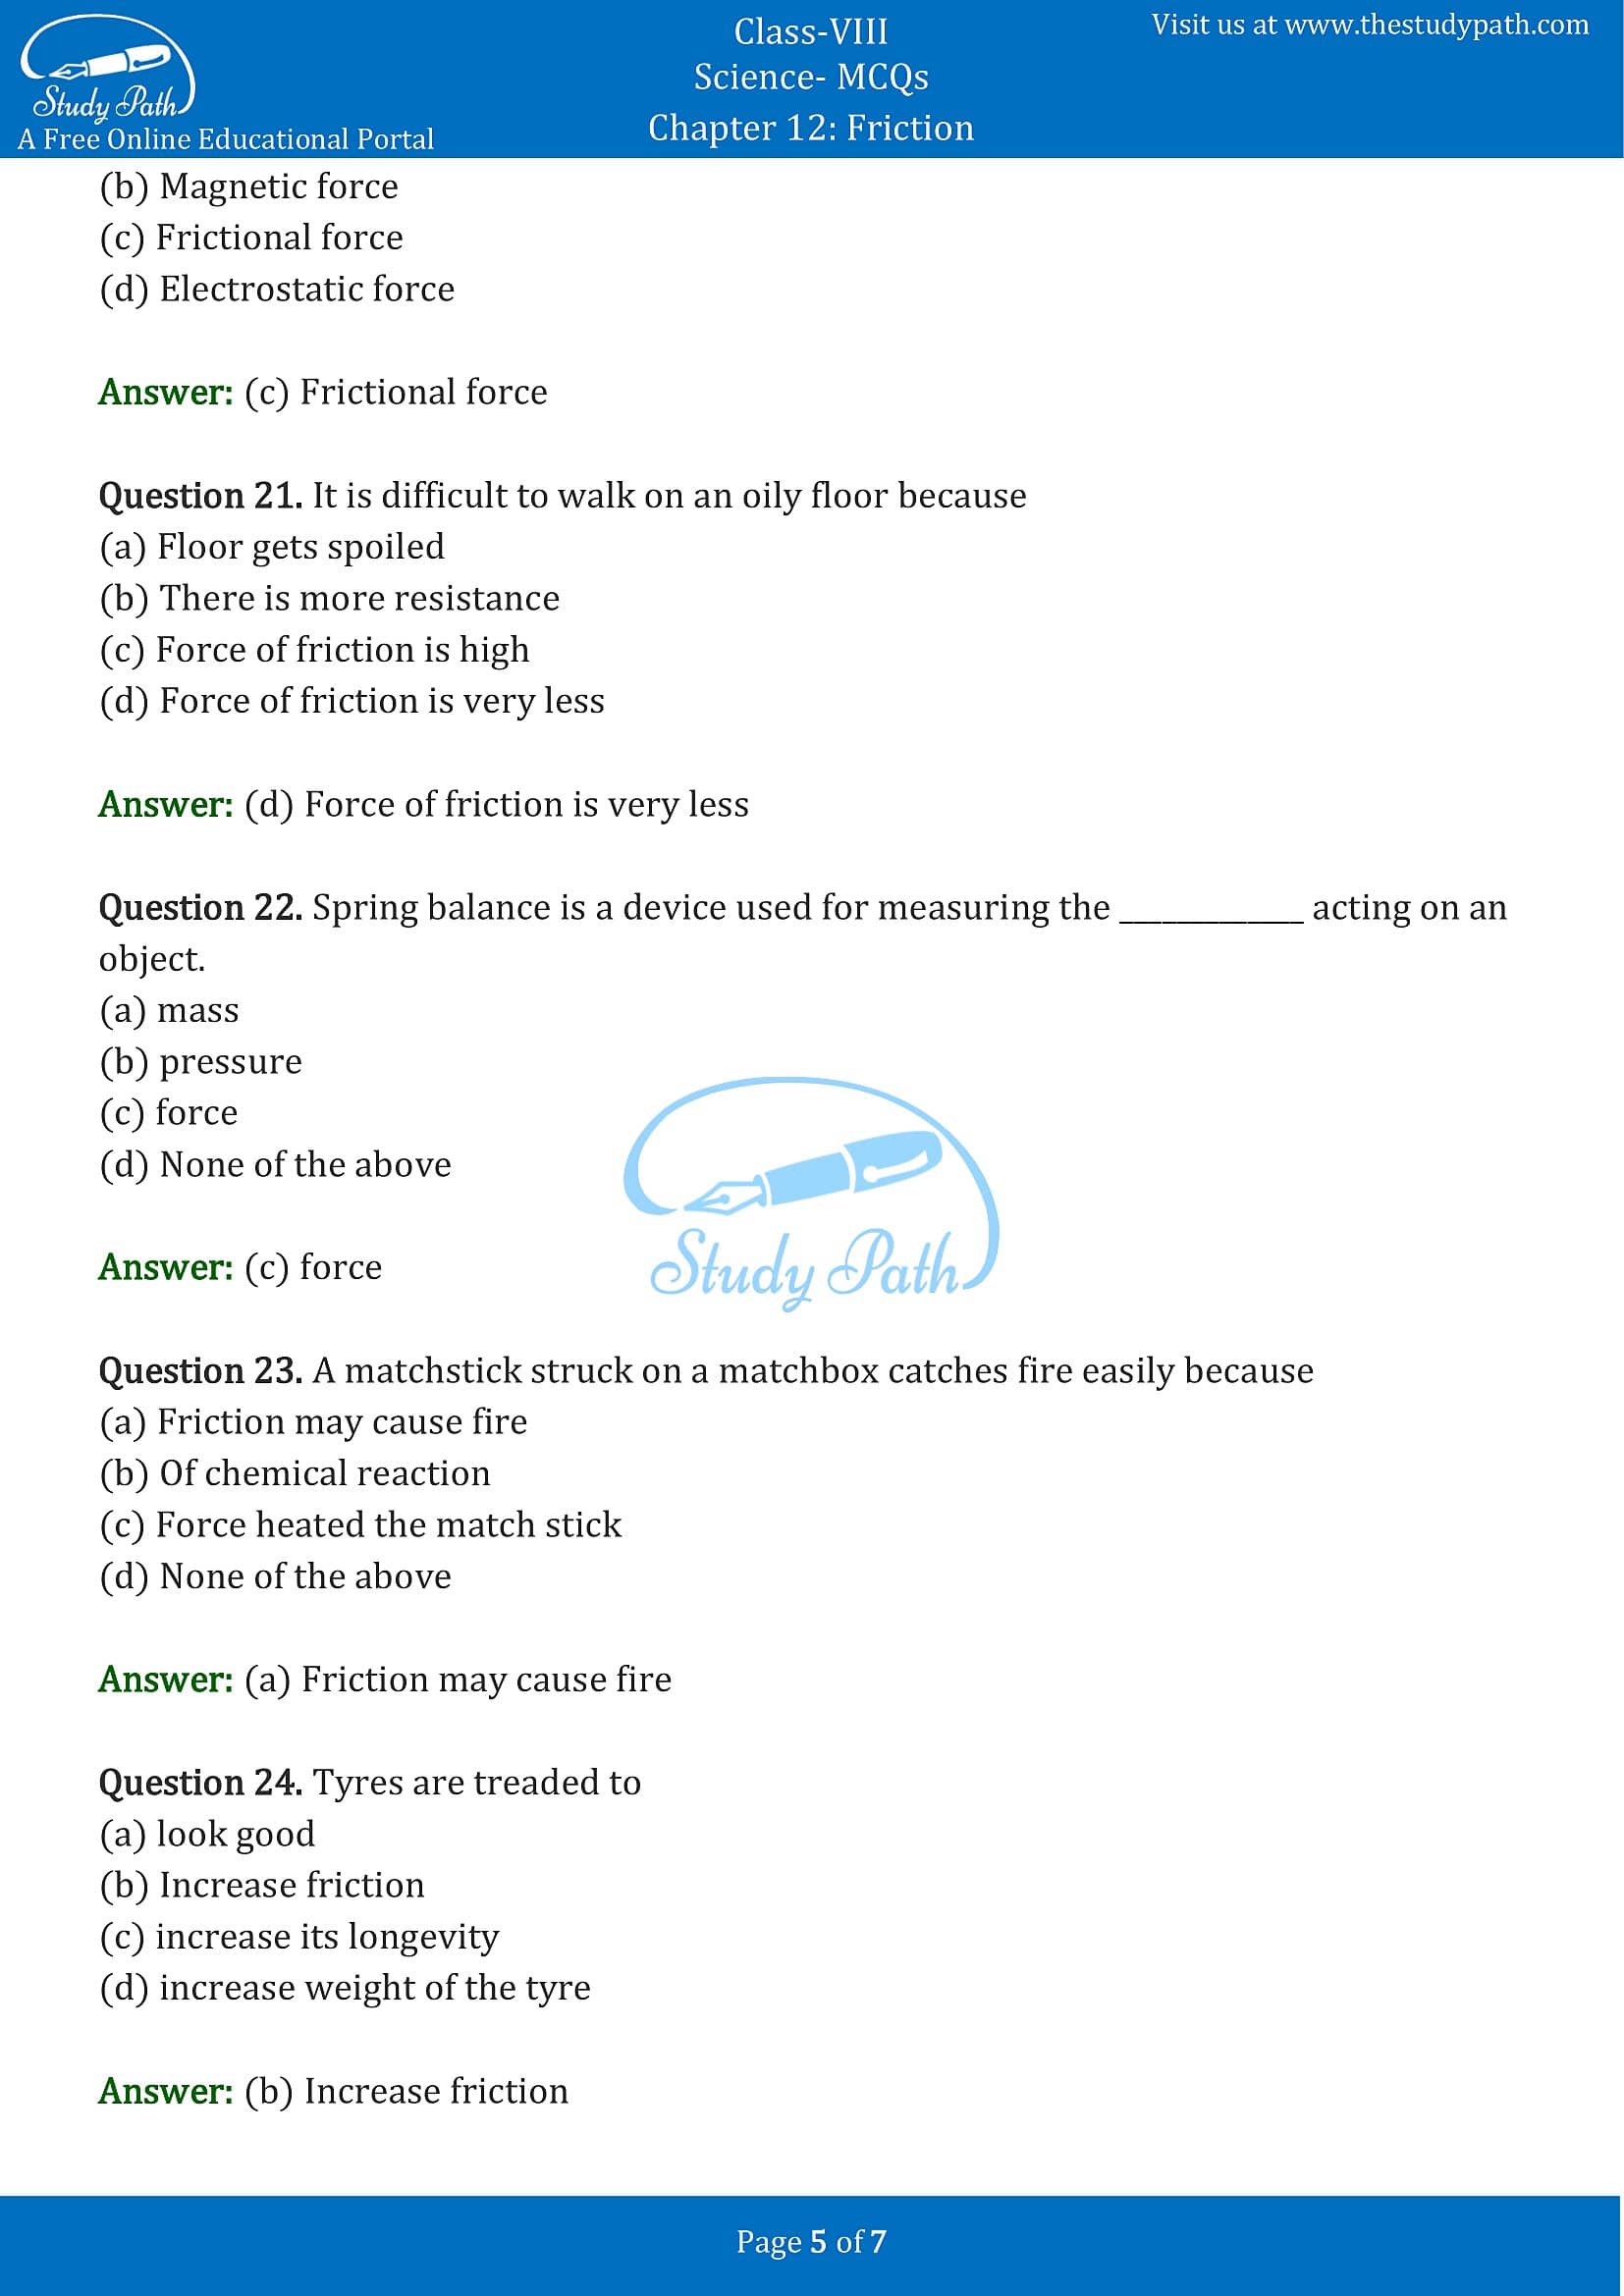 MCQ Questions for Class 8 Science Chapter 12 Friction with Answers PDF -5